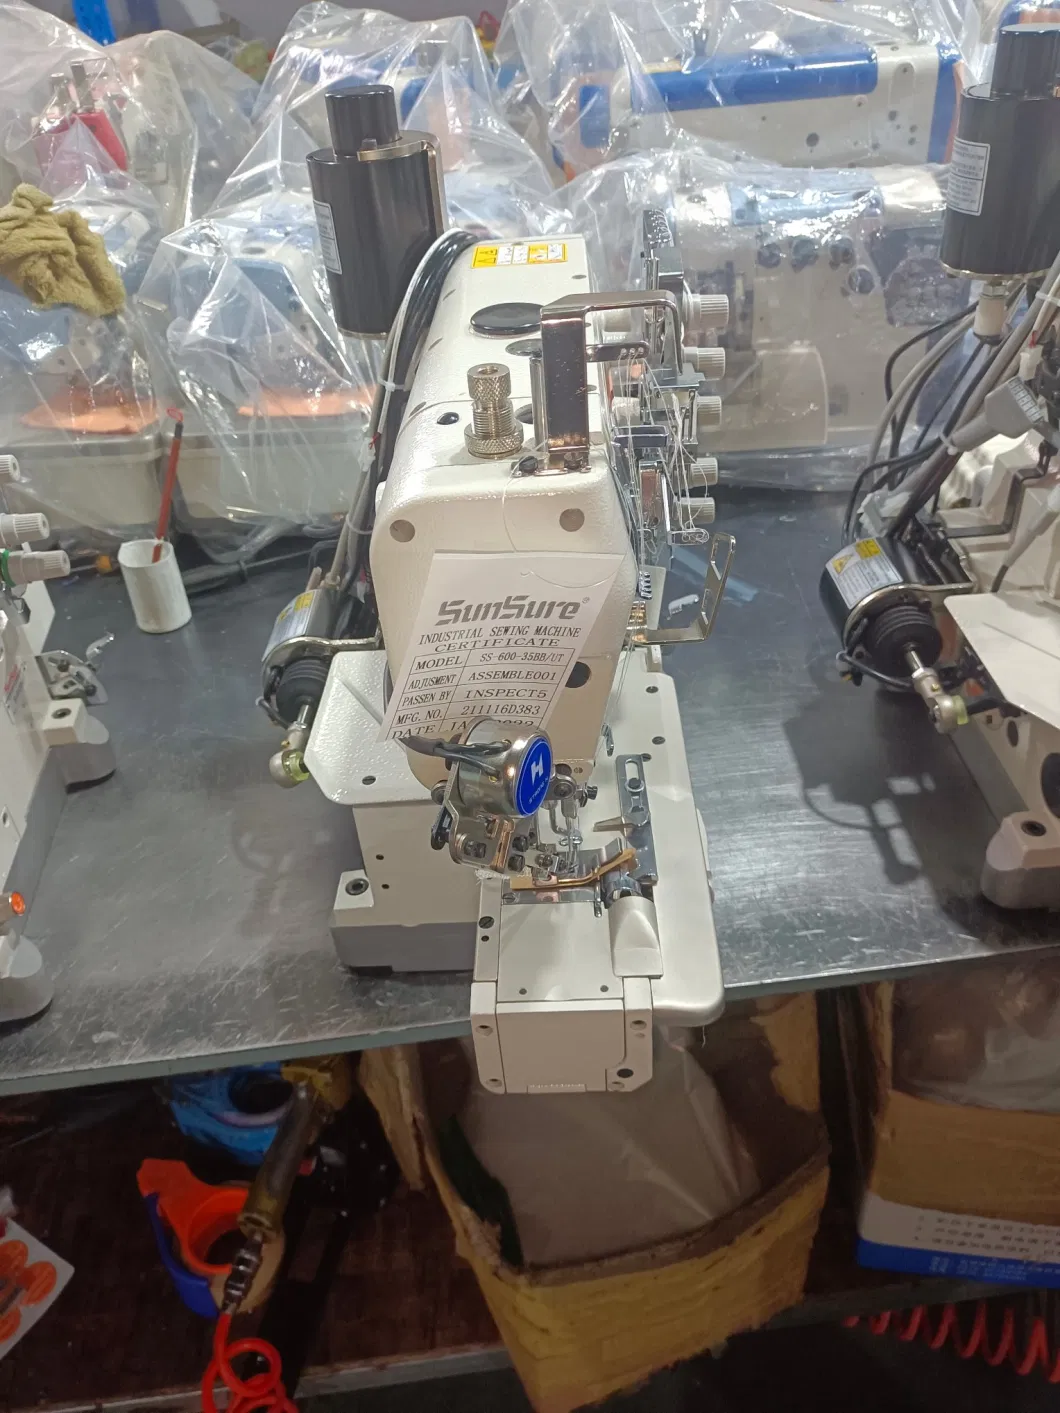 Directly Drive Cylinder Bed Interlock Sewing Machine with Left Cutter Ss-600-35bb/Ut